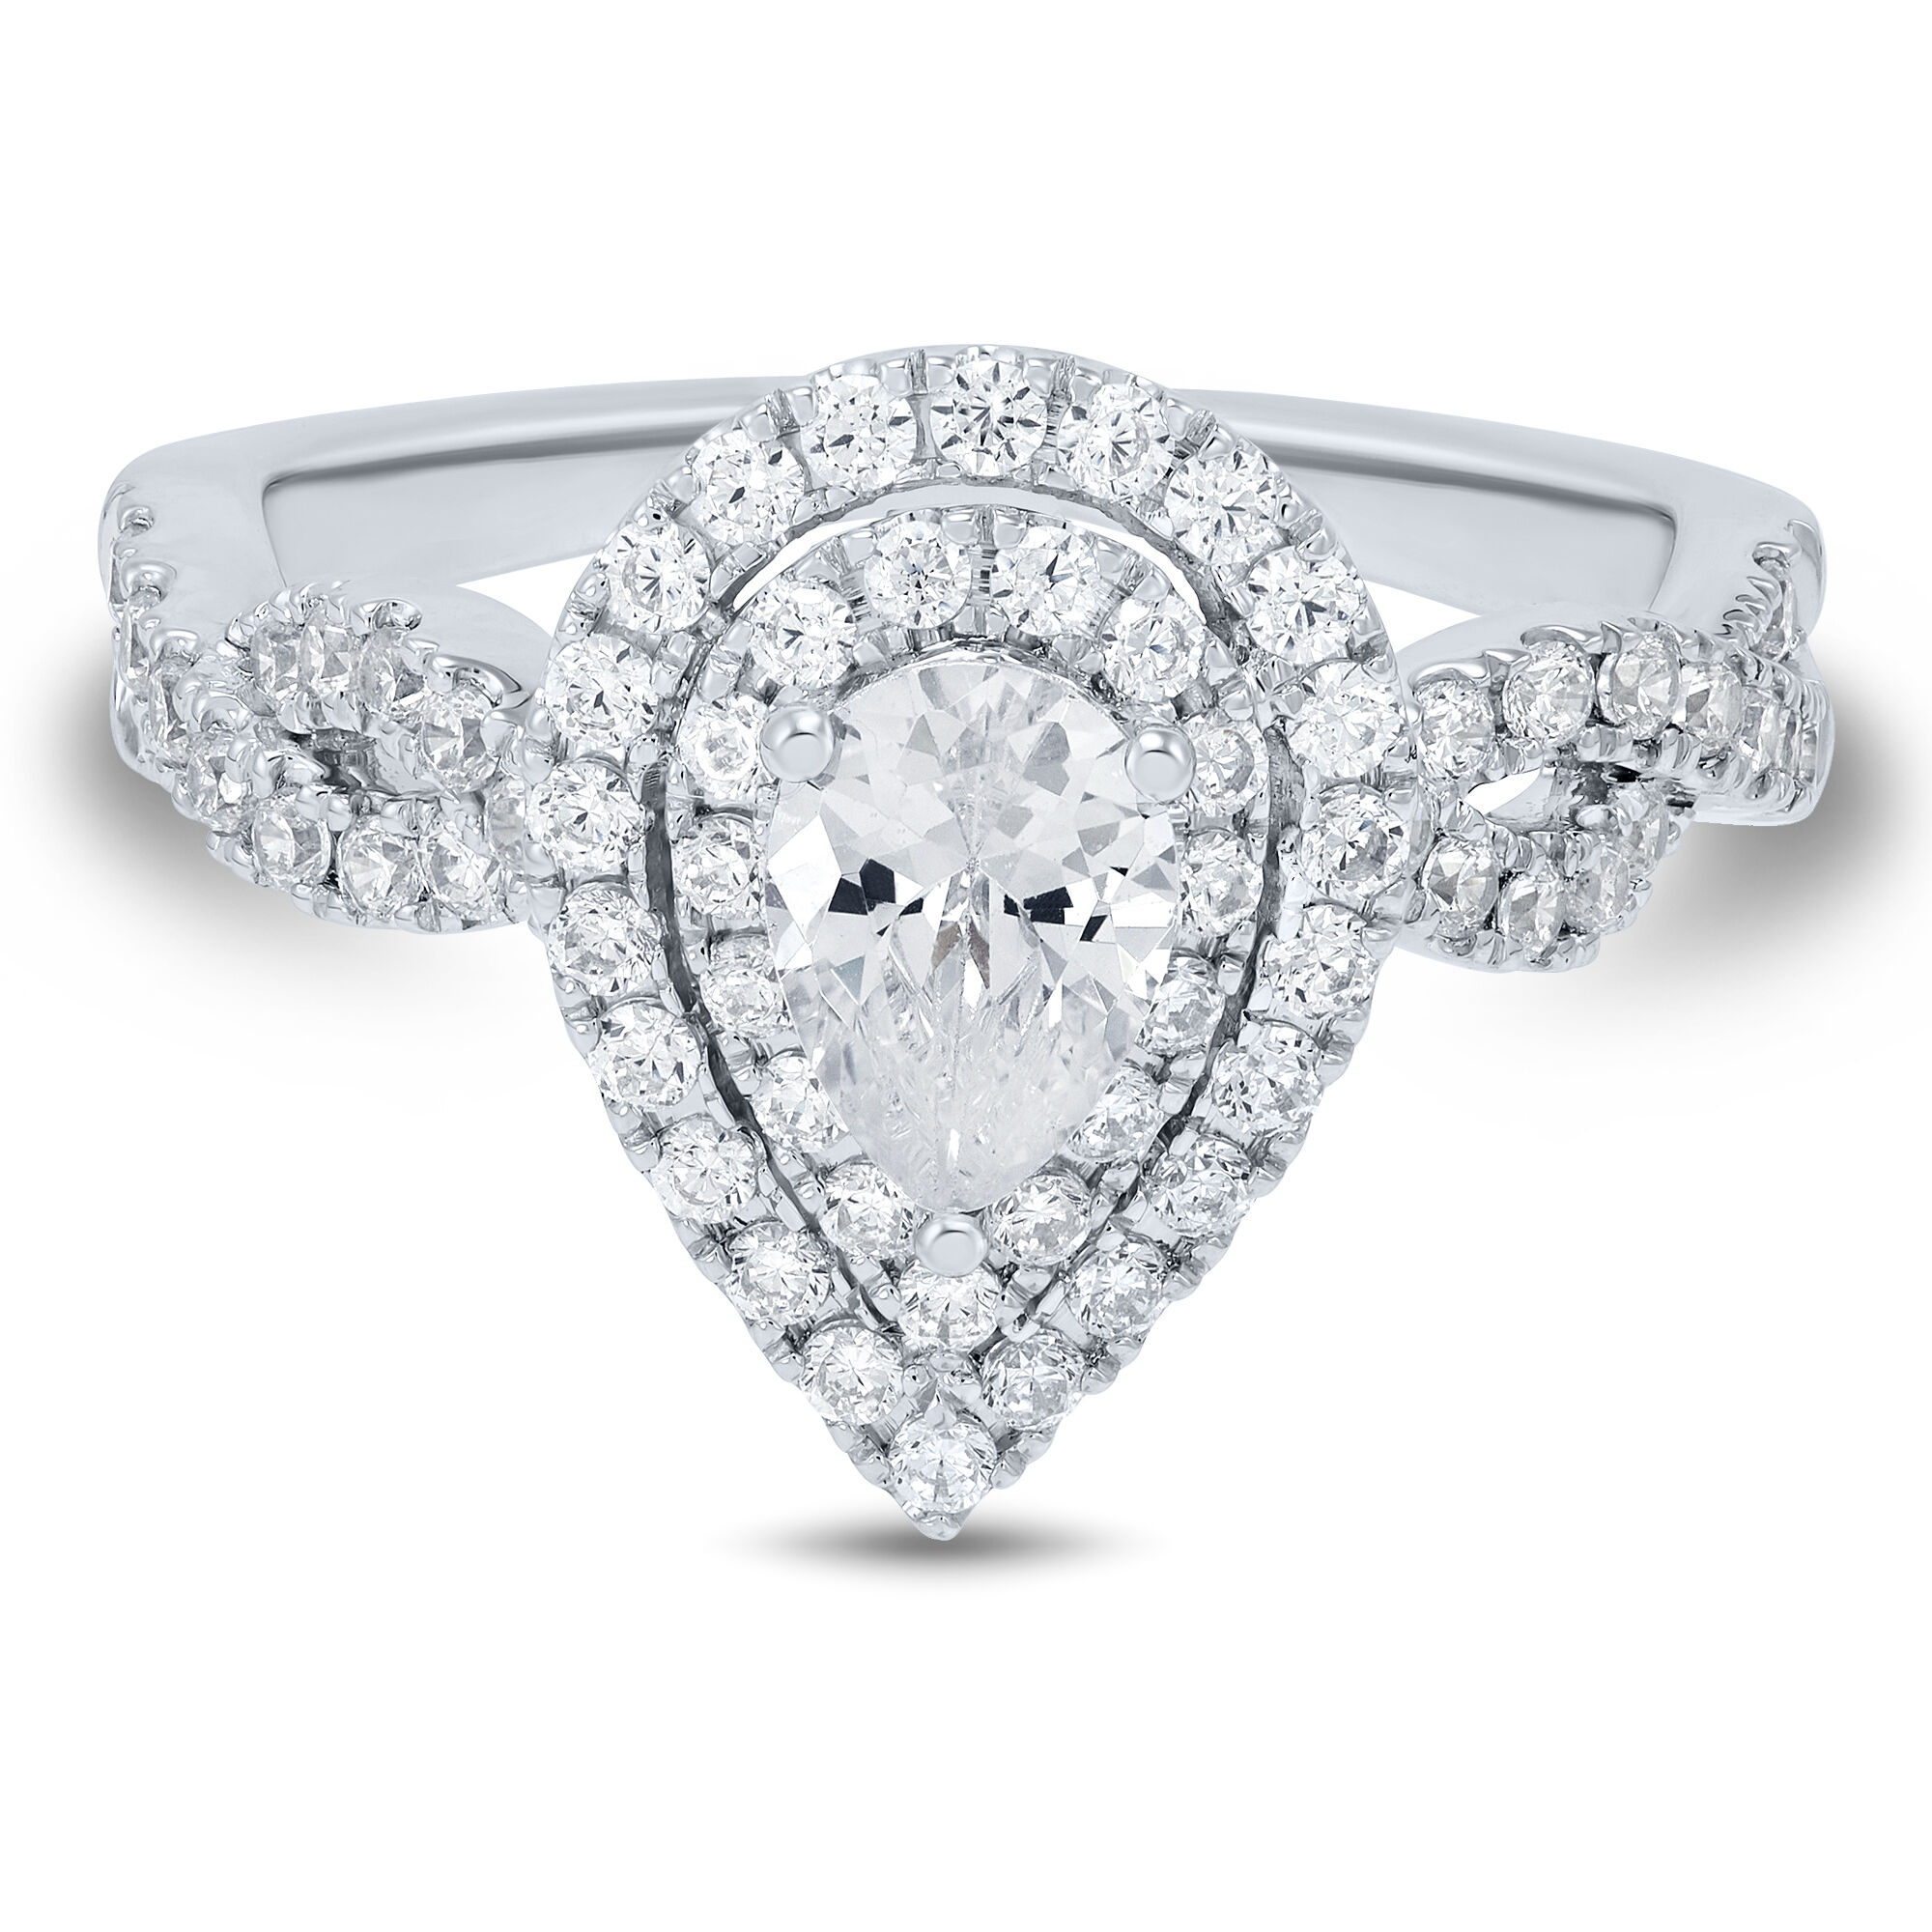 38 Pear Shaped Engagement Rings to Suit Every Bride - hitched.co.uk -  hitched.co.uk